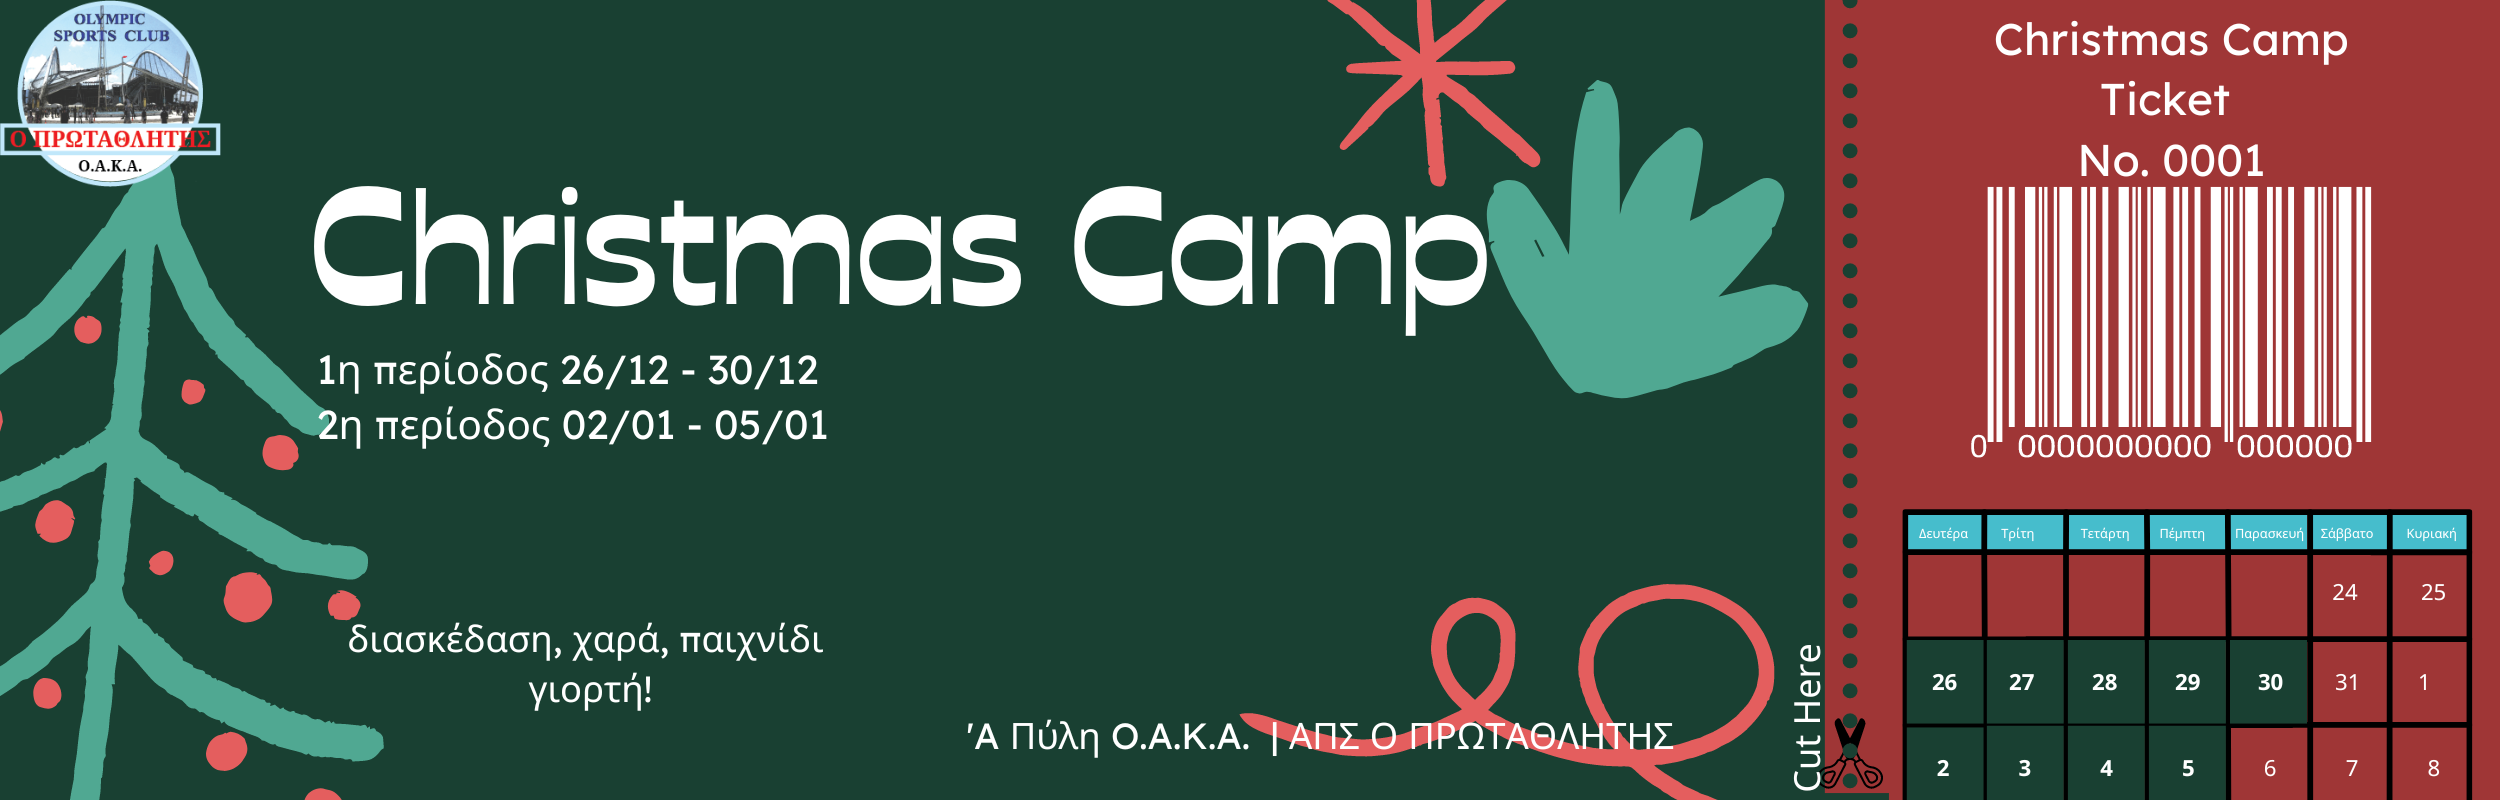 christmas camp οακα ticket